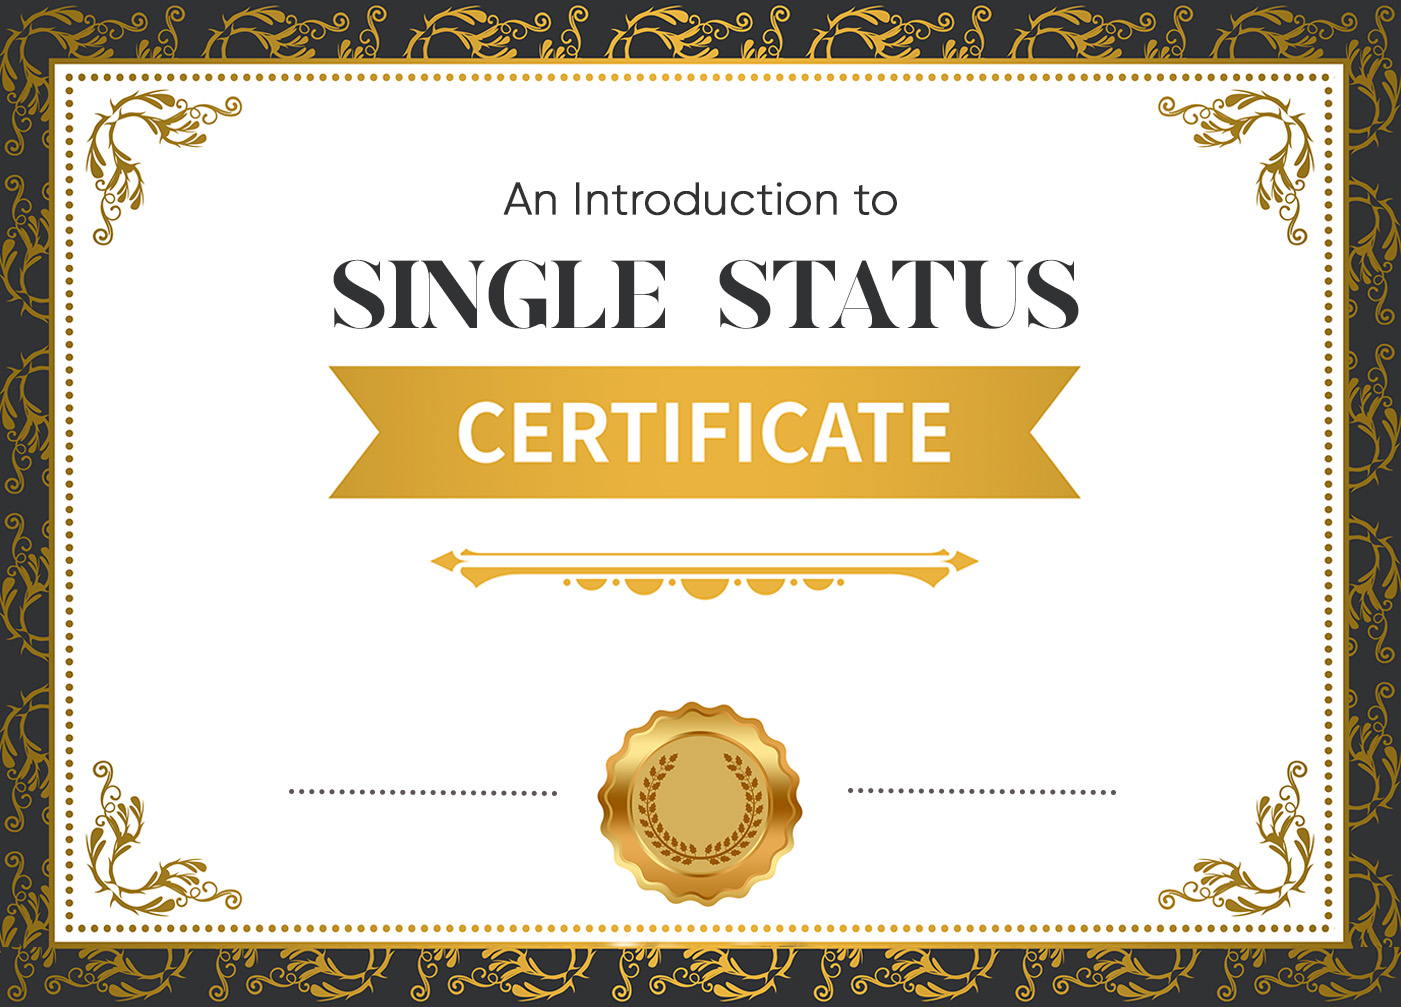 An Introduction to Single Status Certificate | Services2NRI